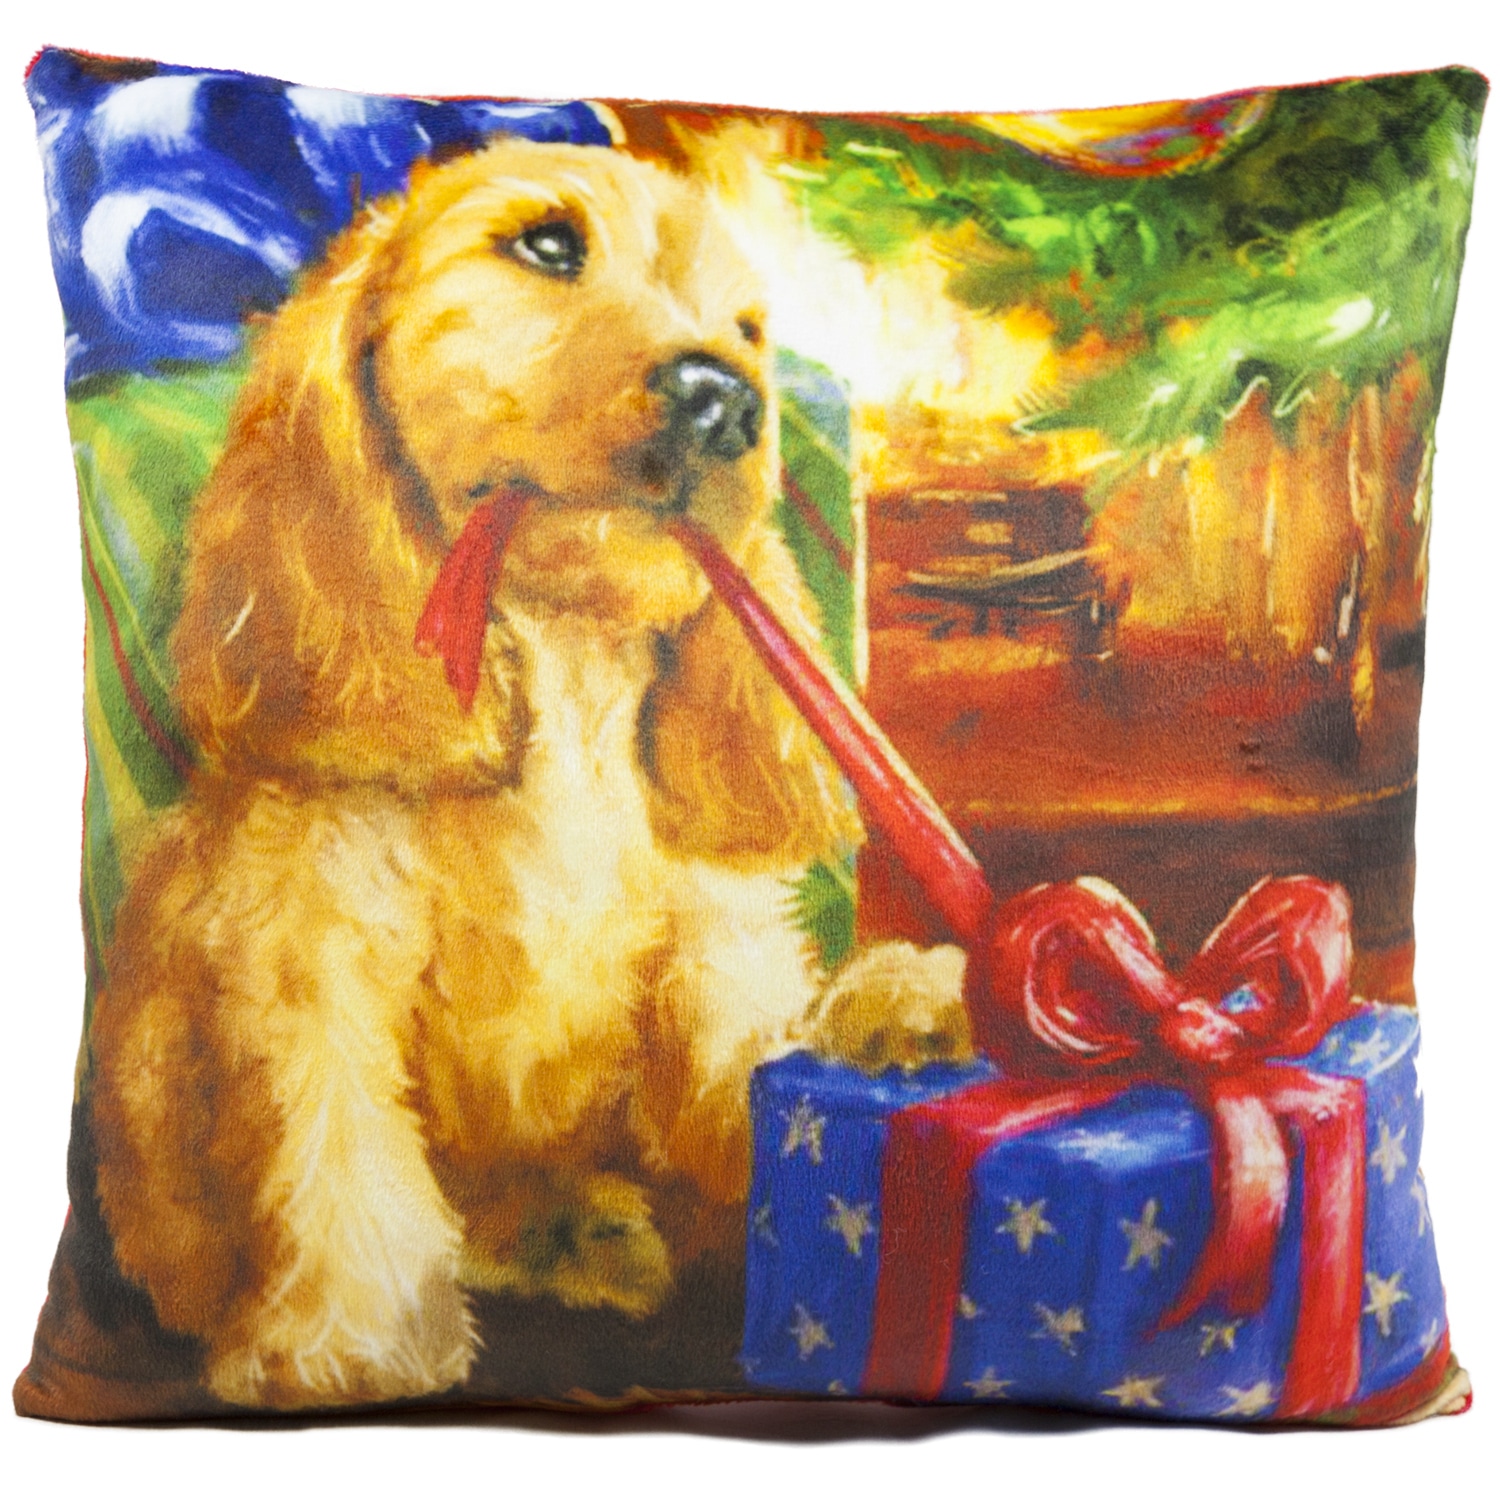 Christmas pillow - Dog with a gift